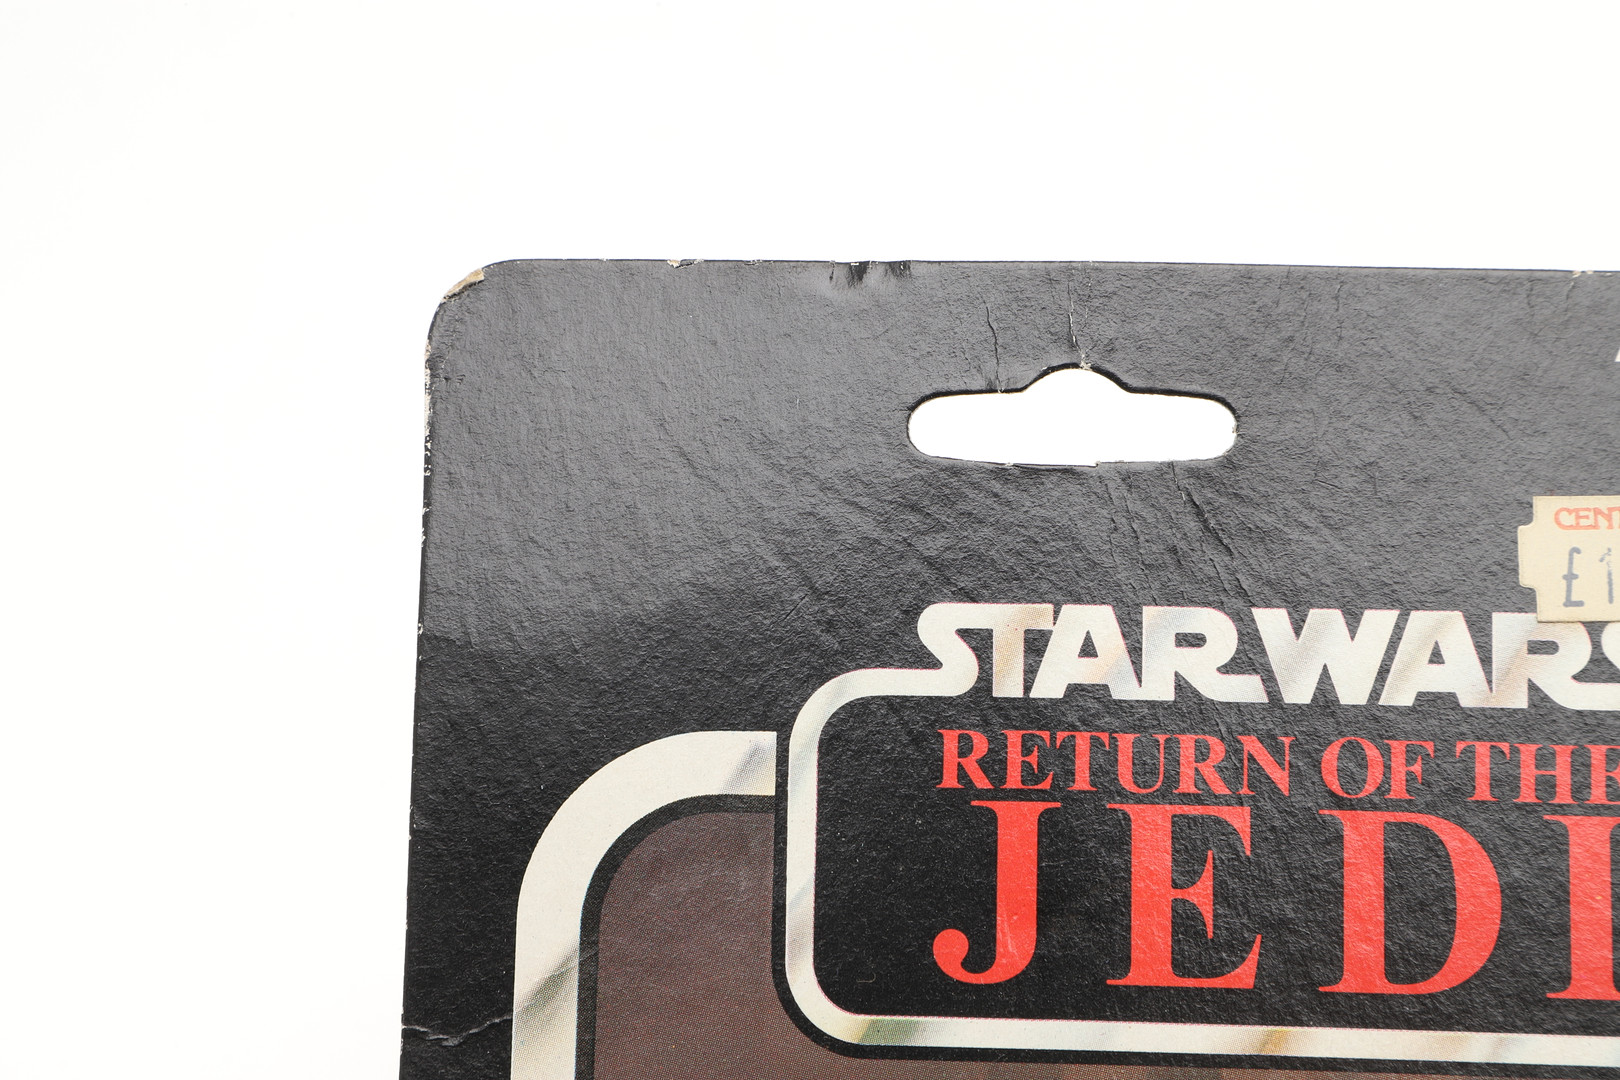 STAR WARS CARDED FIGURE BY PALITOY - DARTH VADER. - Image 4 of 8